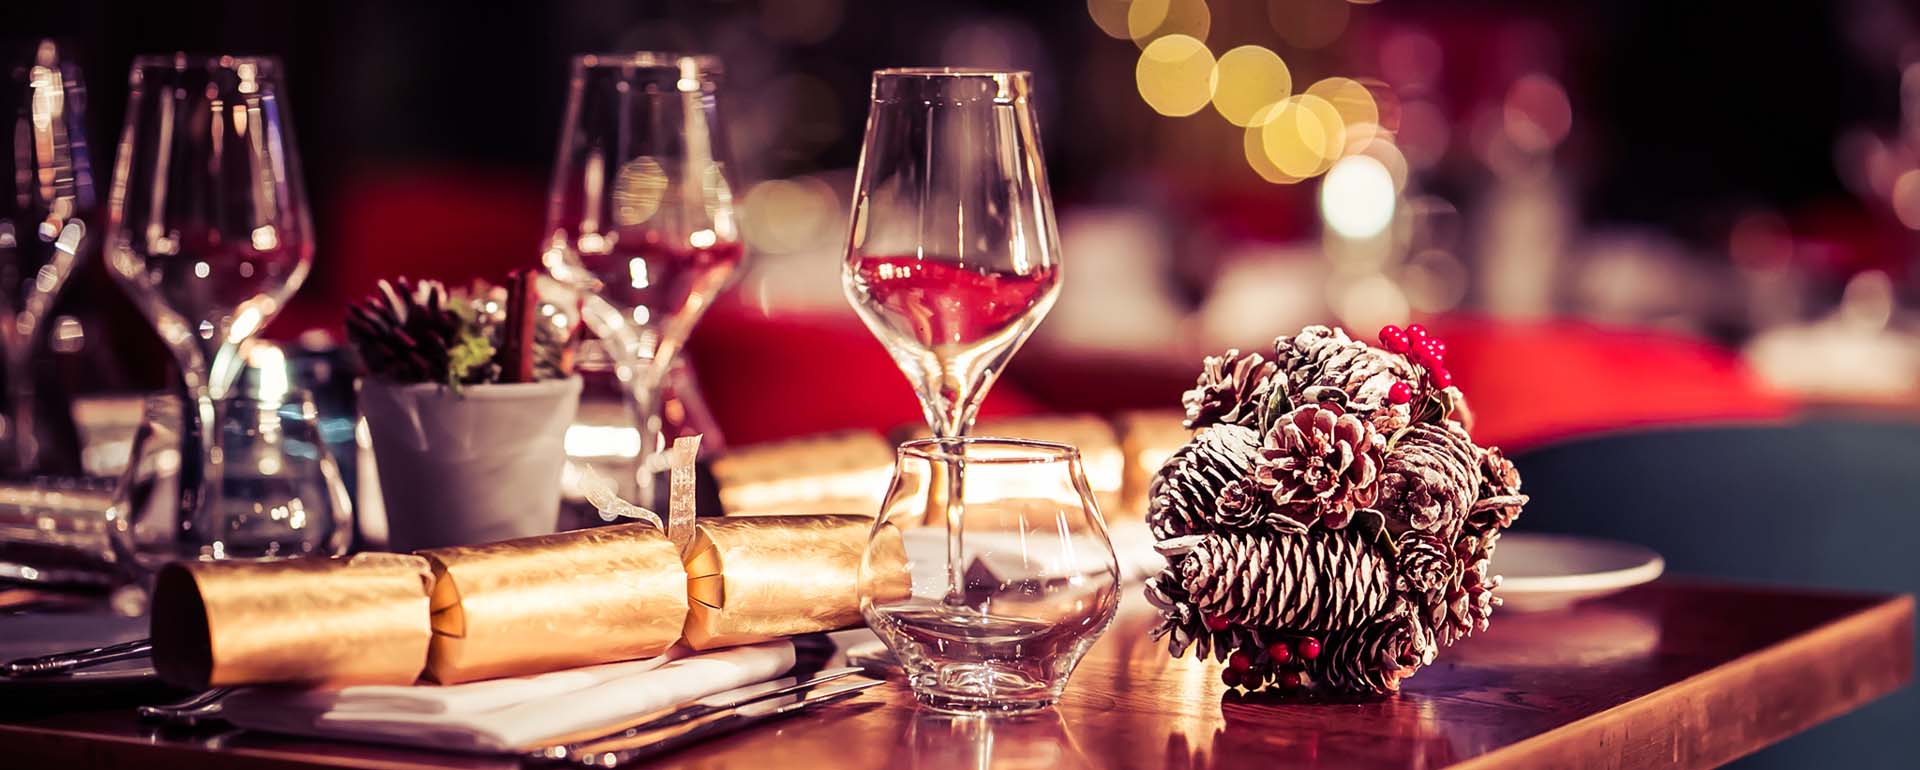 Christmas table setting with crackers